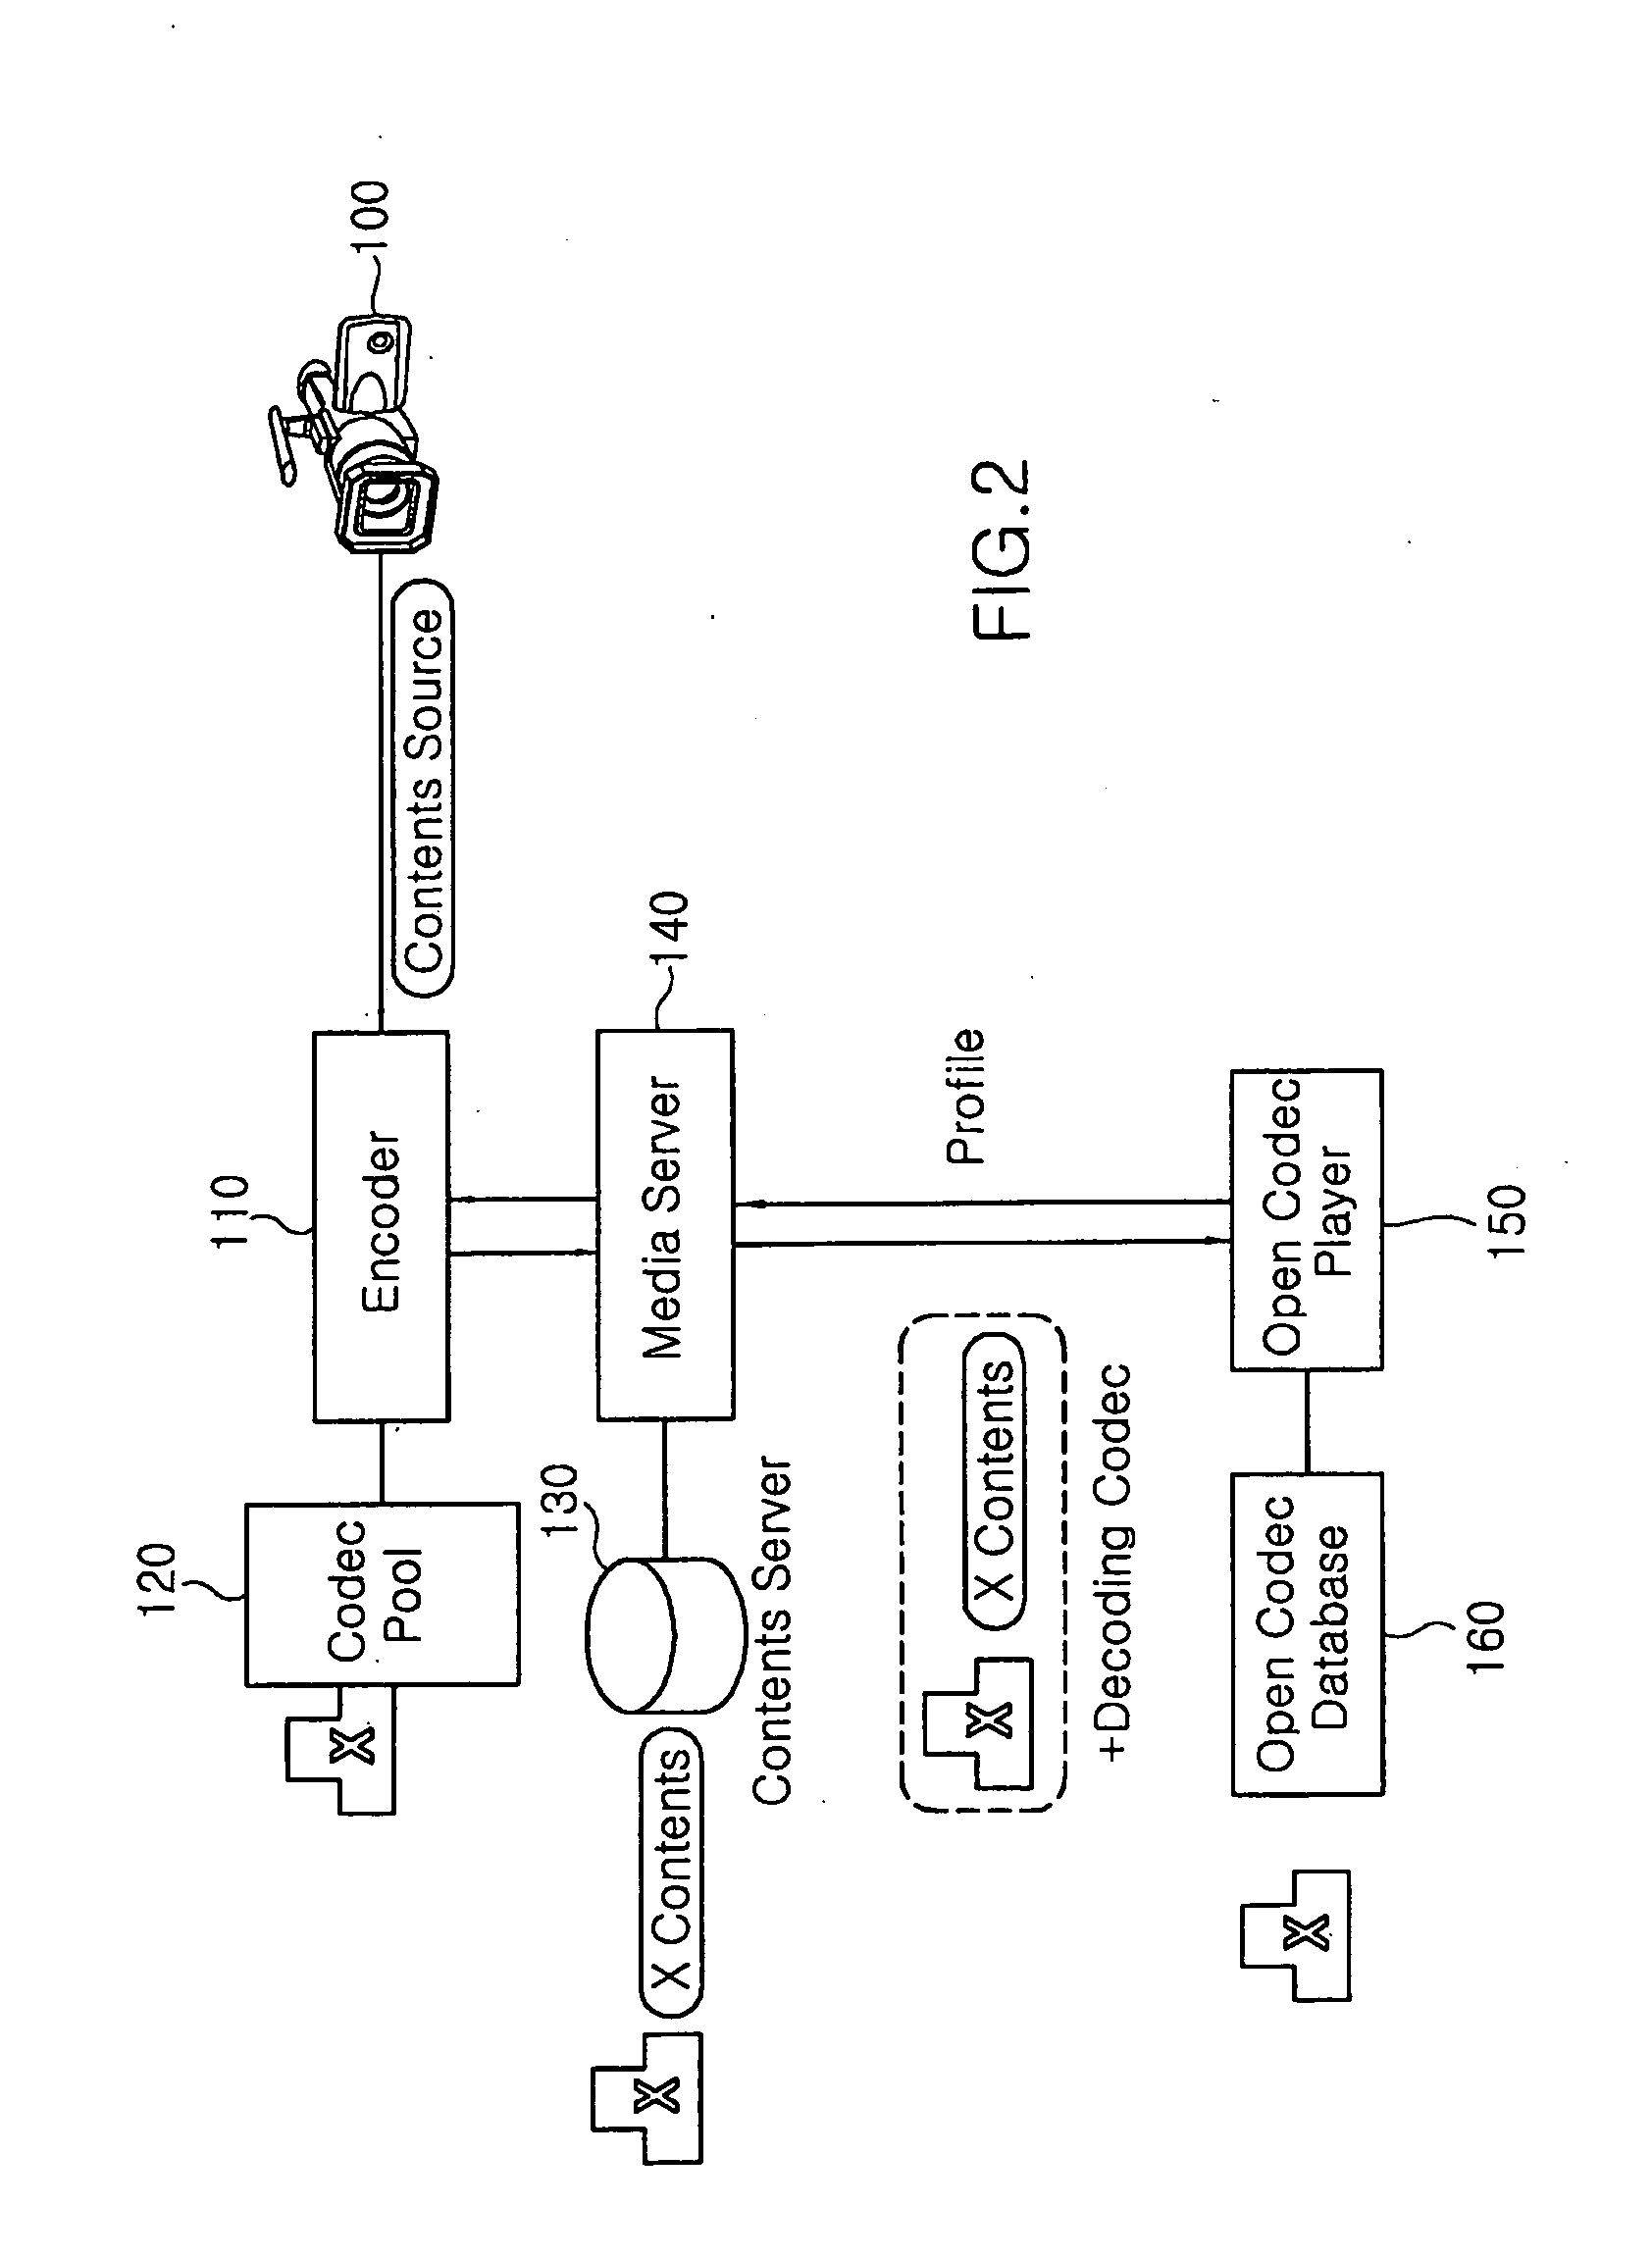 Adaptive multimedia system for providing multimedia contents and codec to user terminal and method thereof